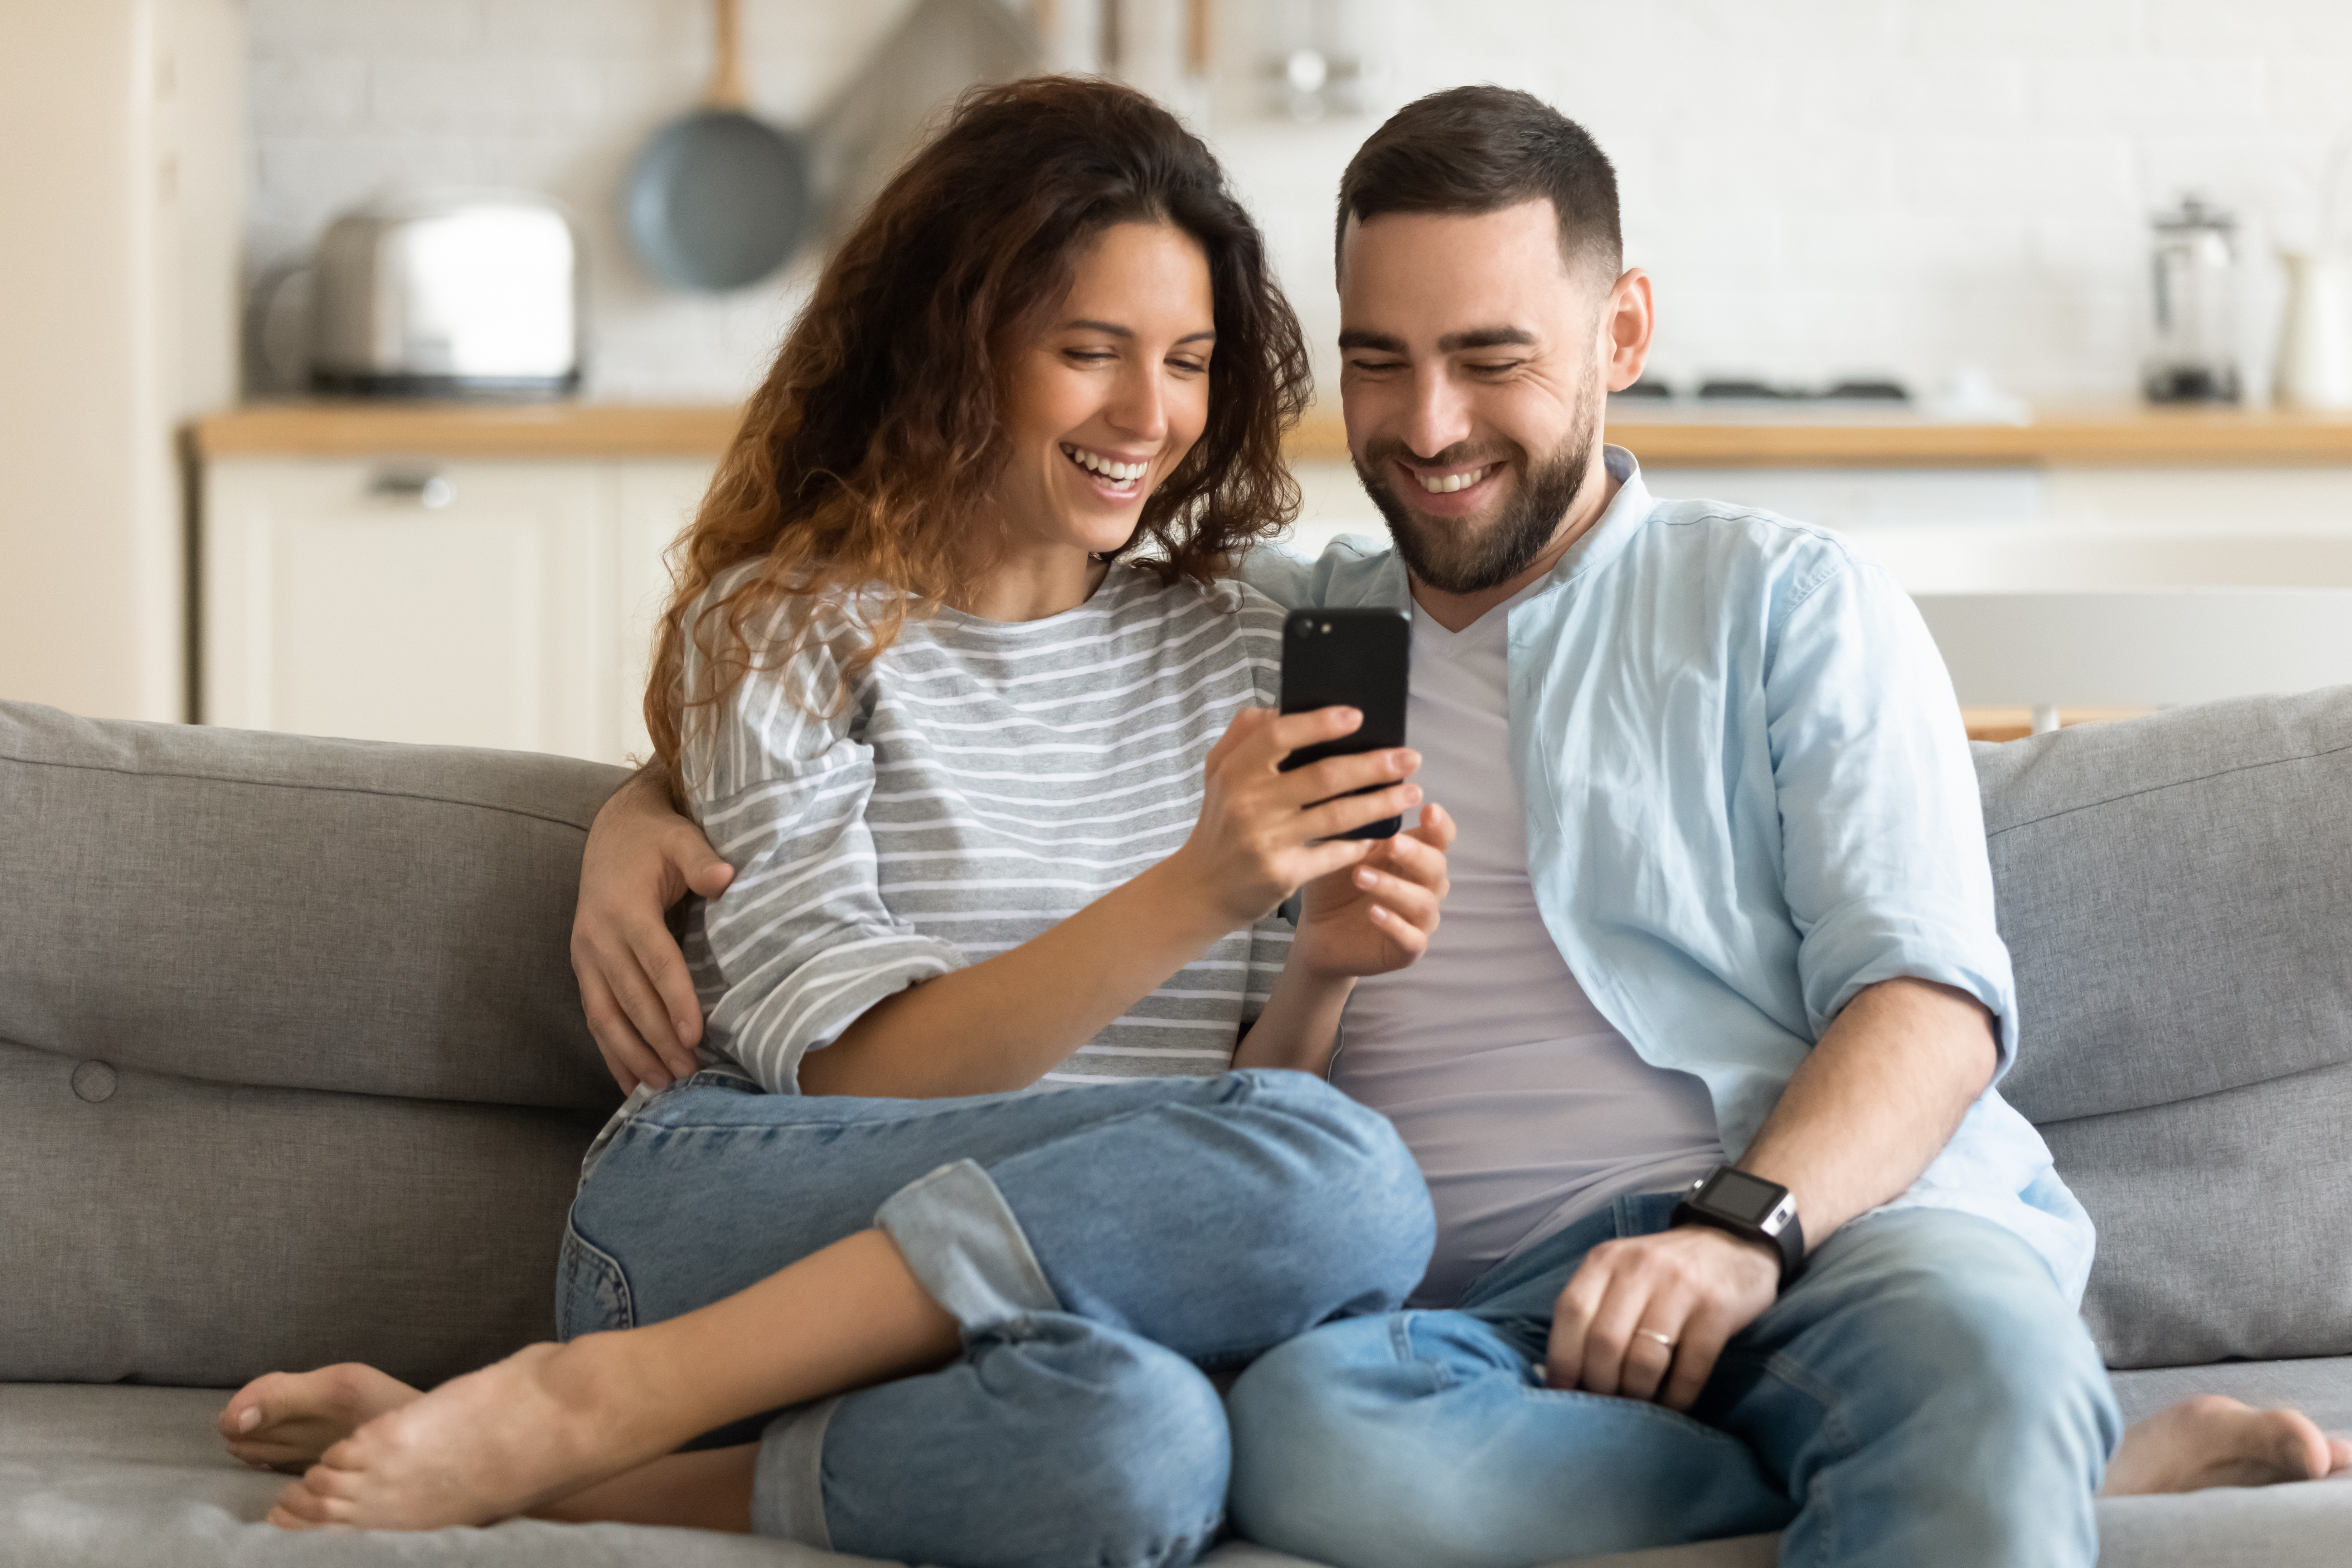 A couple using their smartphone while sitting on a couch | Source: Shutterstock